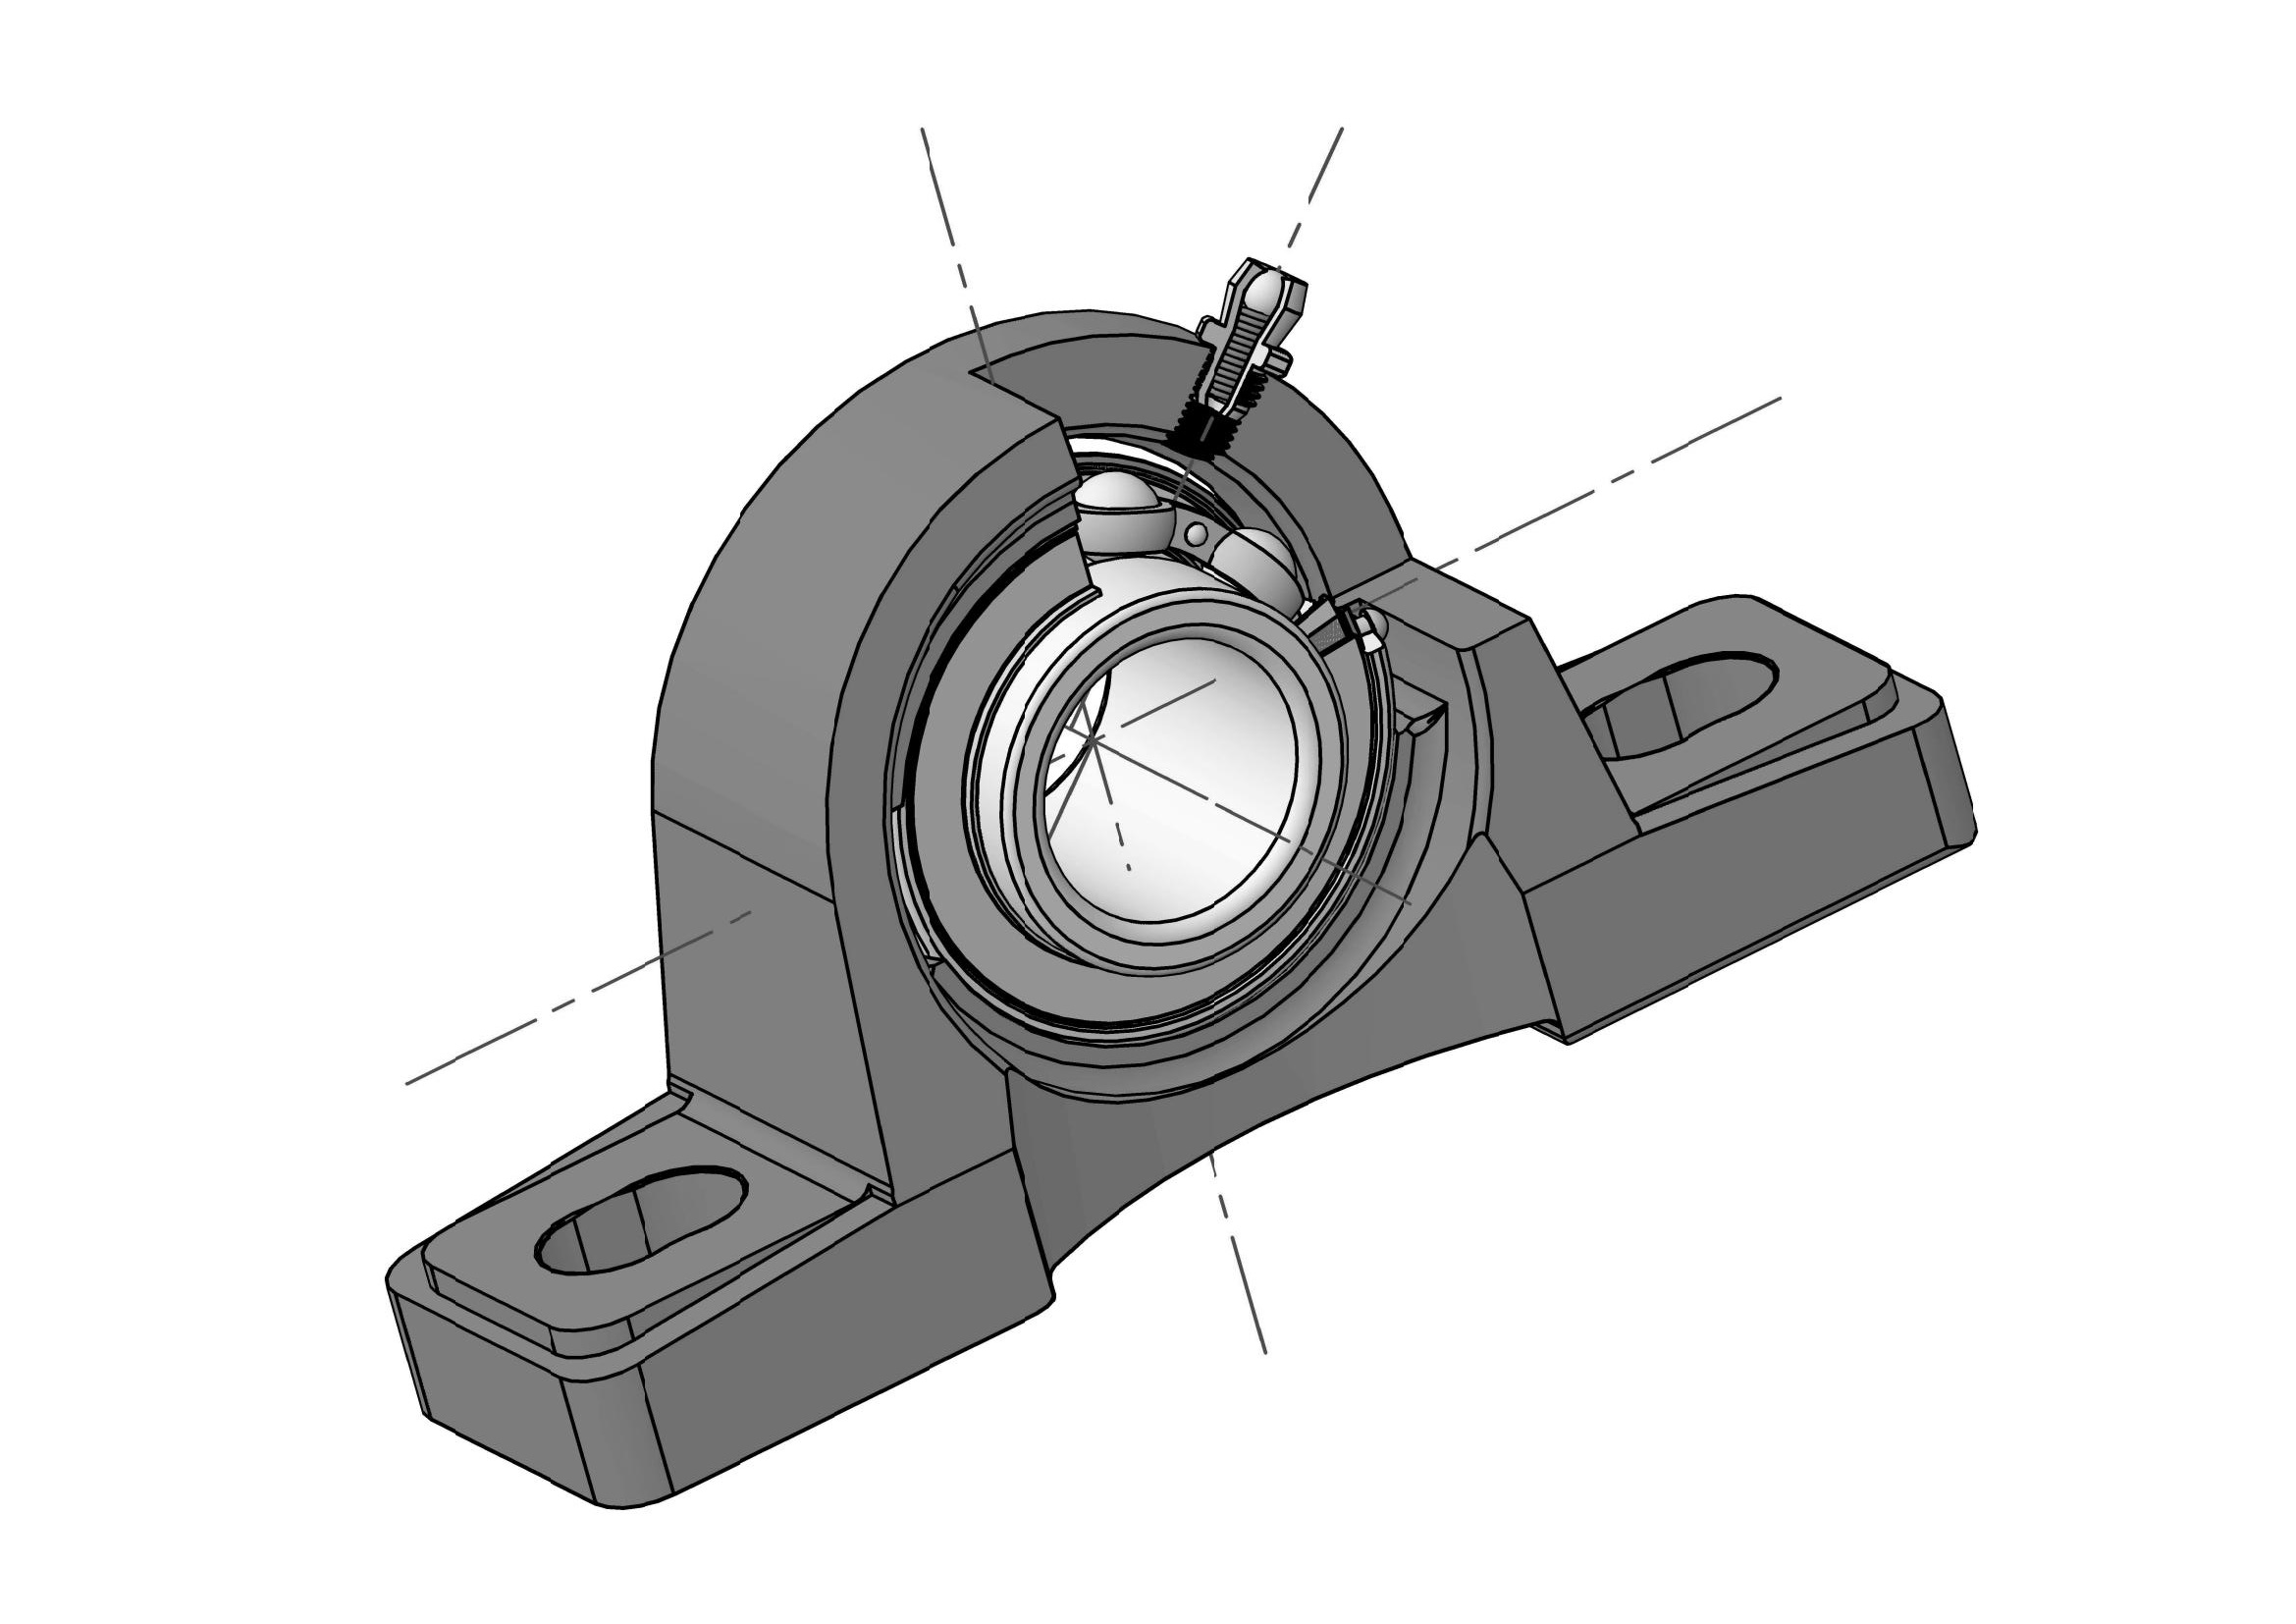 UCP214-42 Pillow block ball bearing units with 2-5/8 inch bore